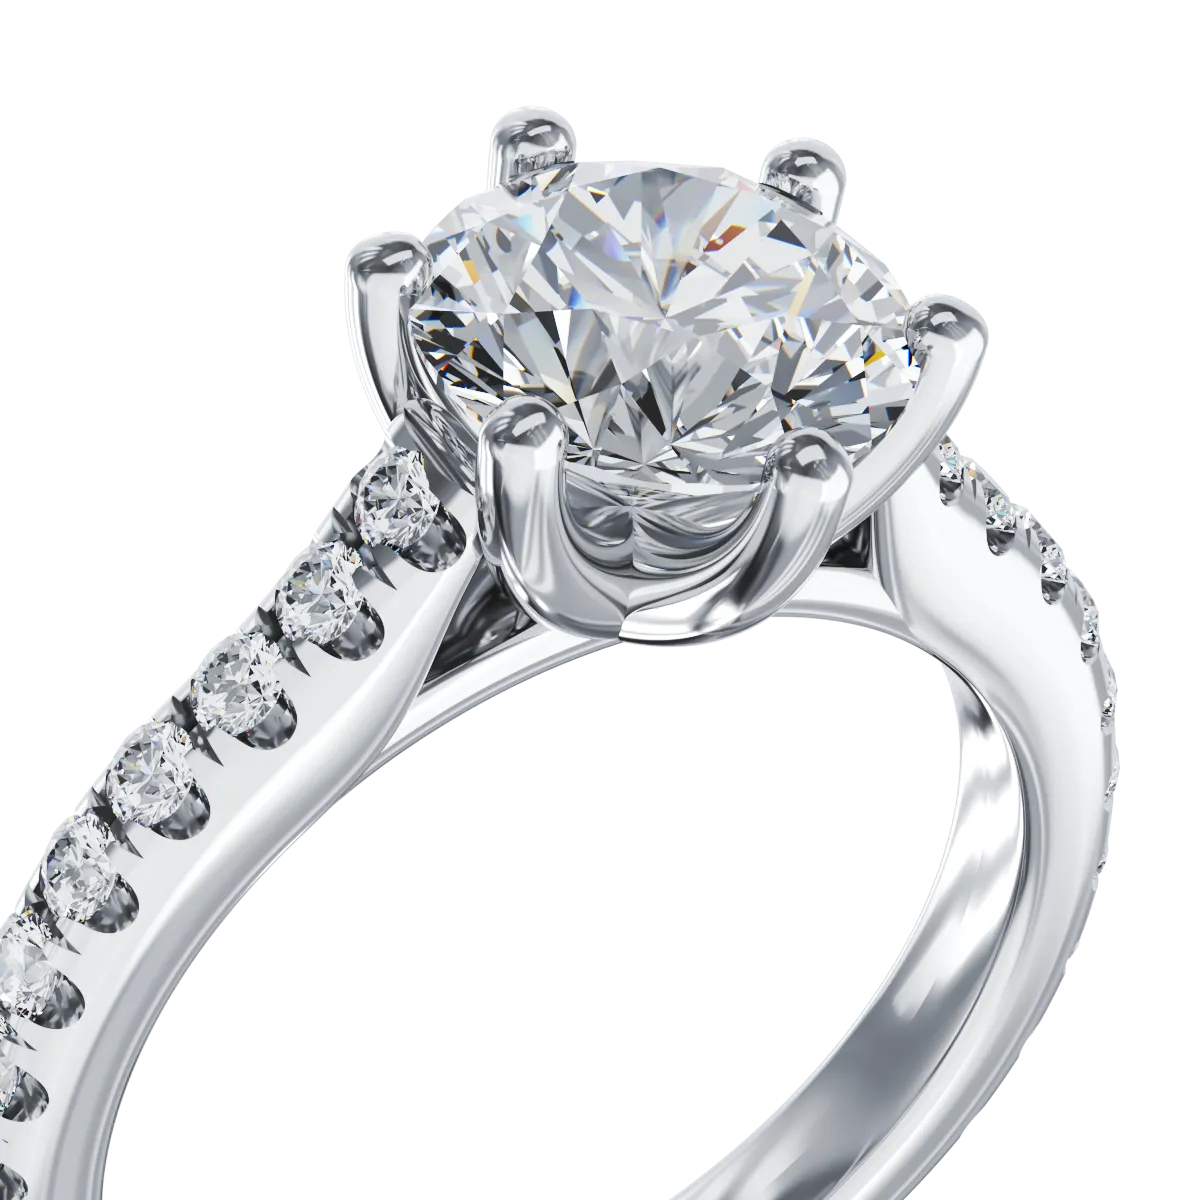 18K white gold engagement ring with 1.31ct diamond and 0.307ct diamonds